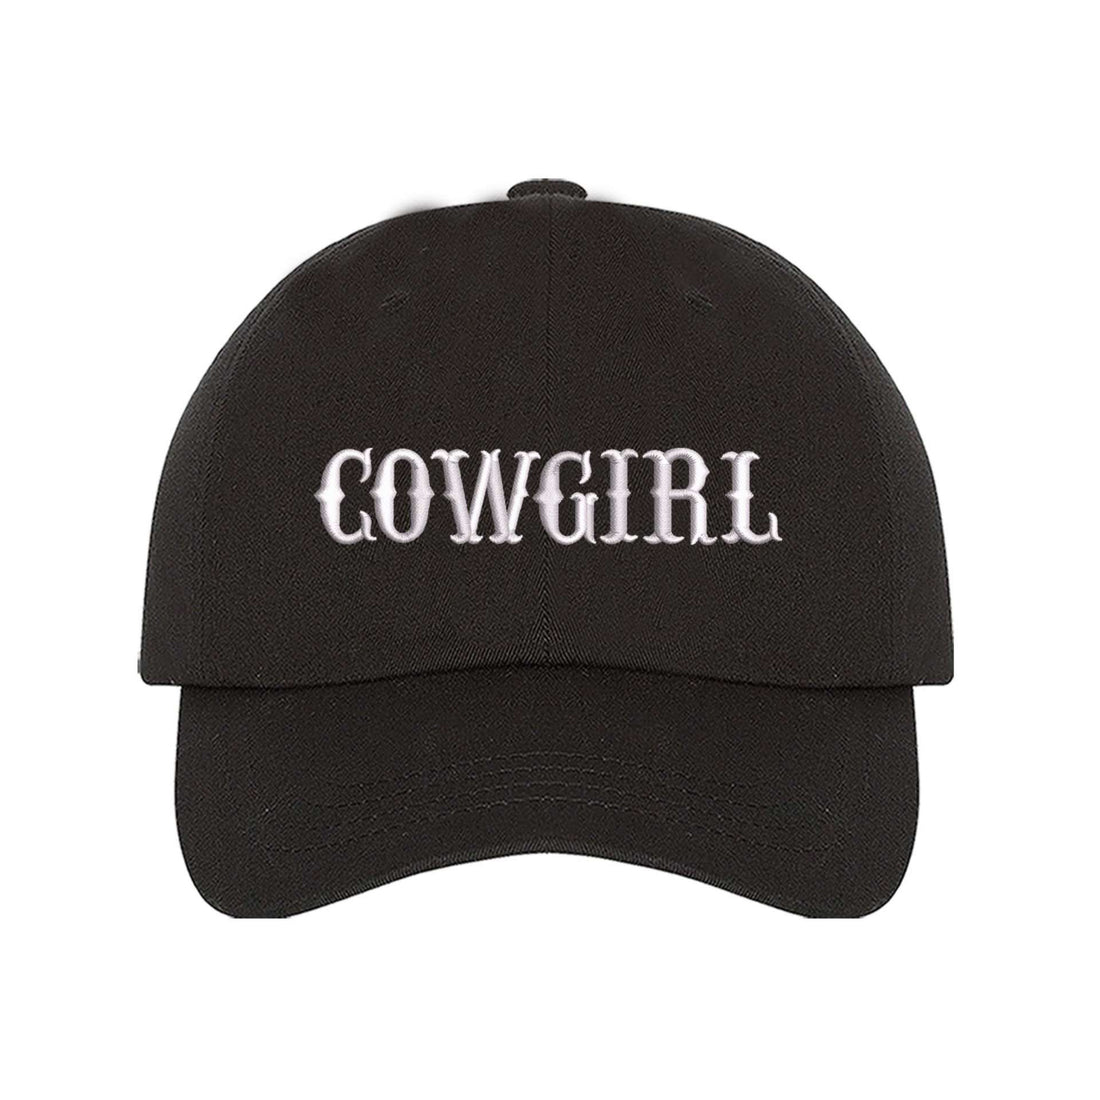 Black Baseball Cap embroidered with Cowgirl - DSY Lifestyle